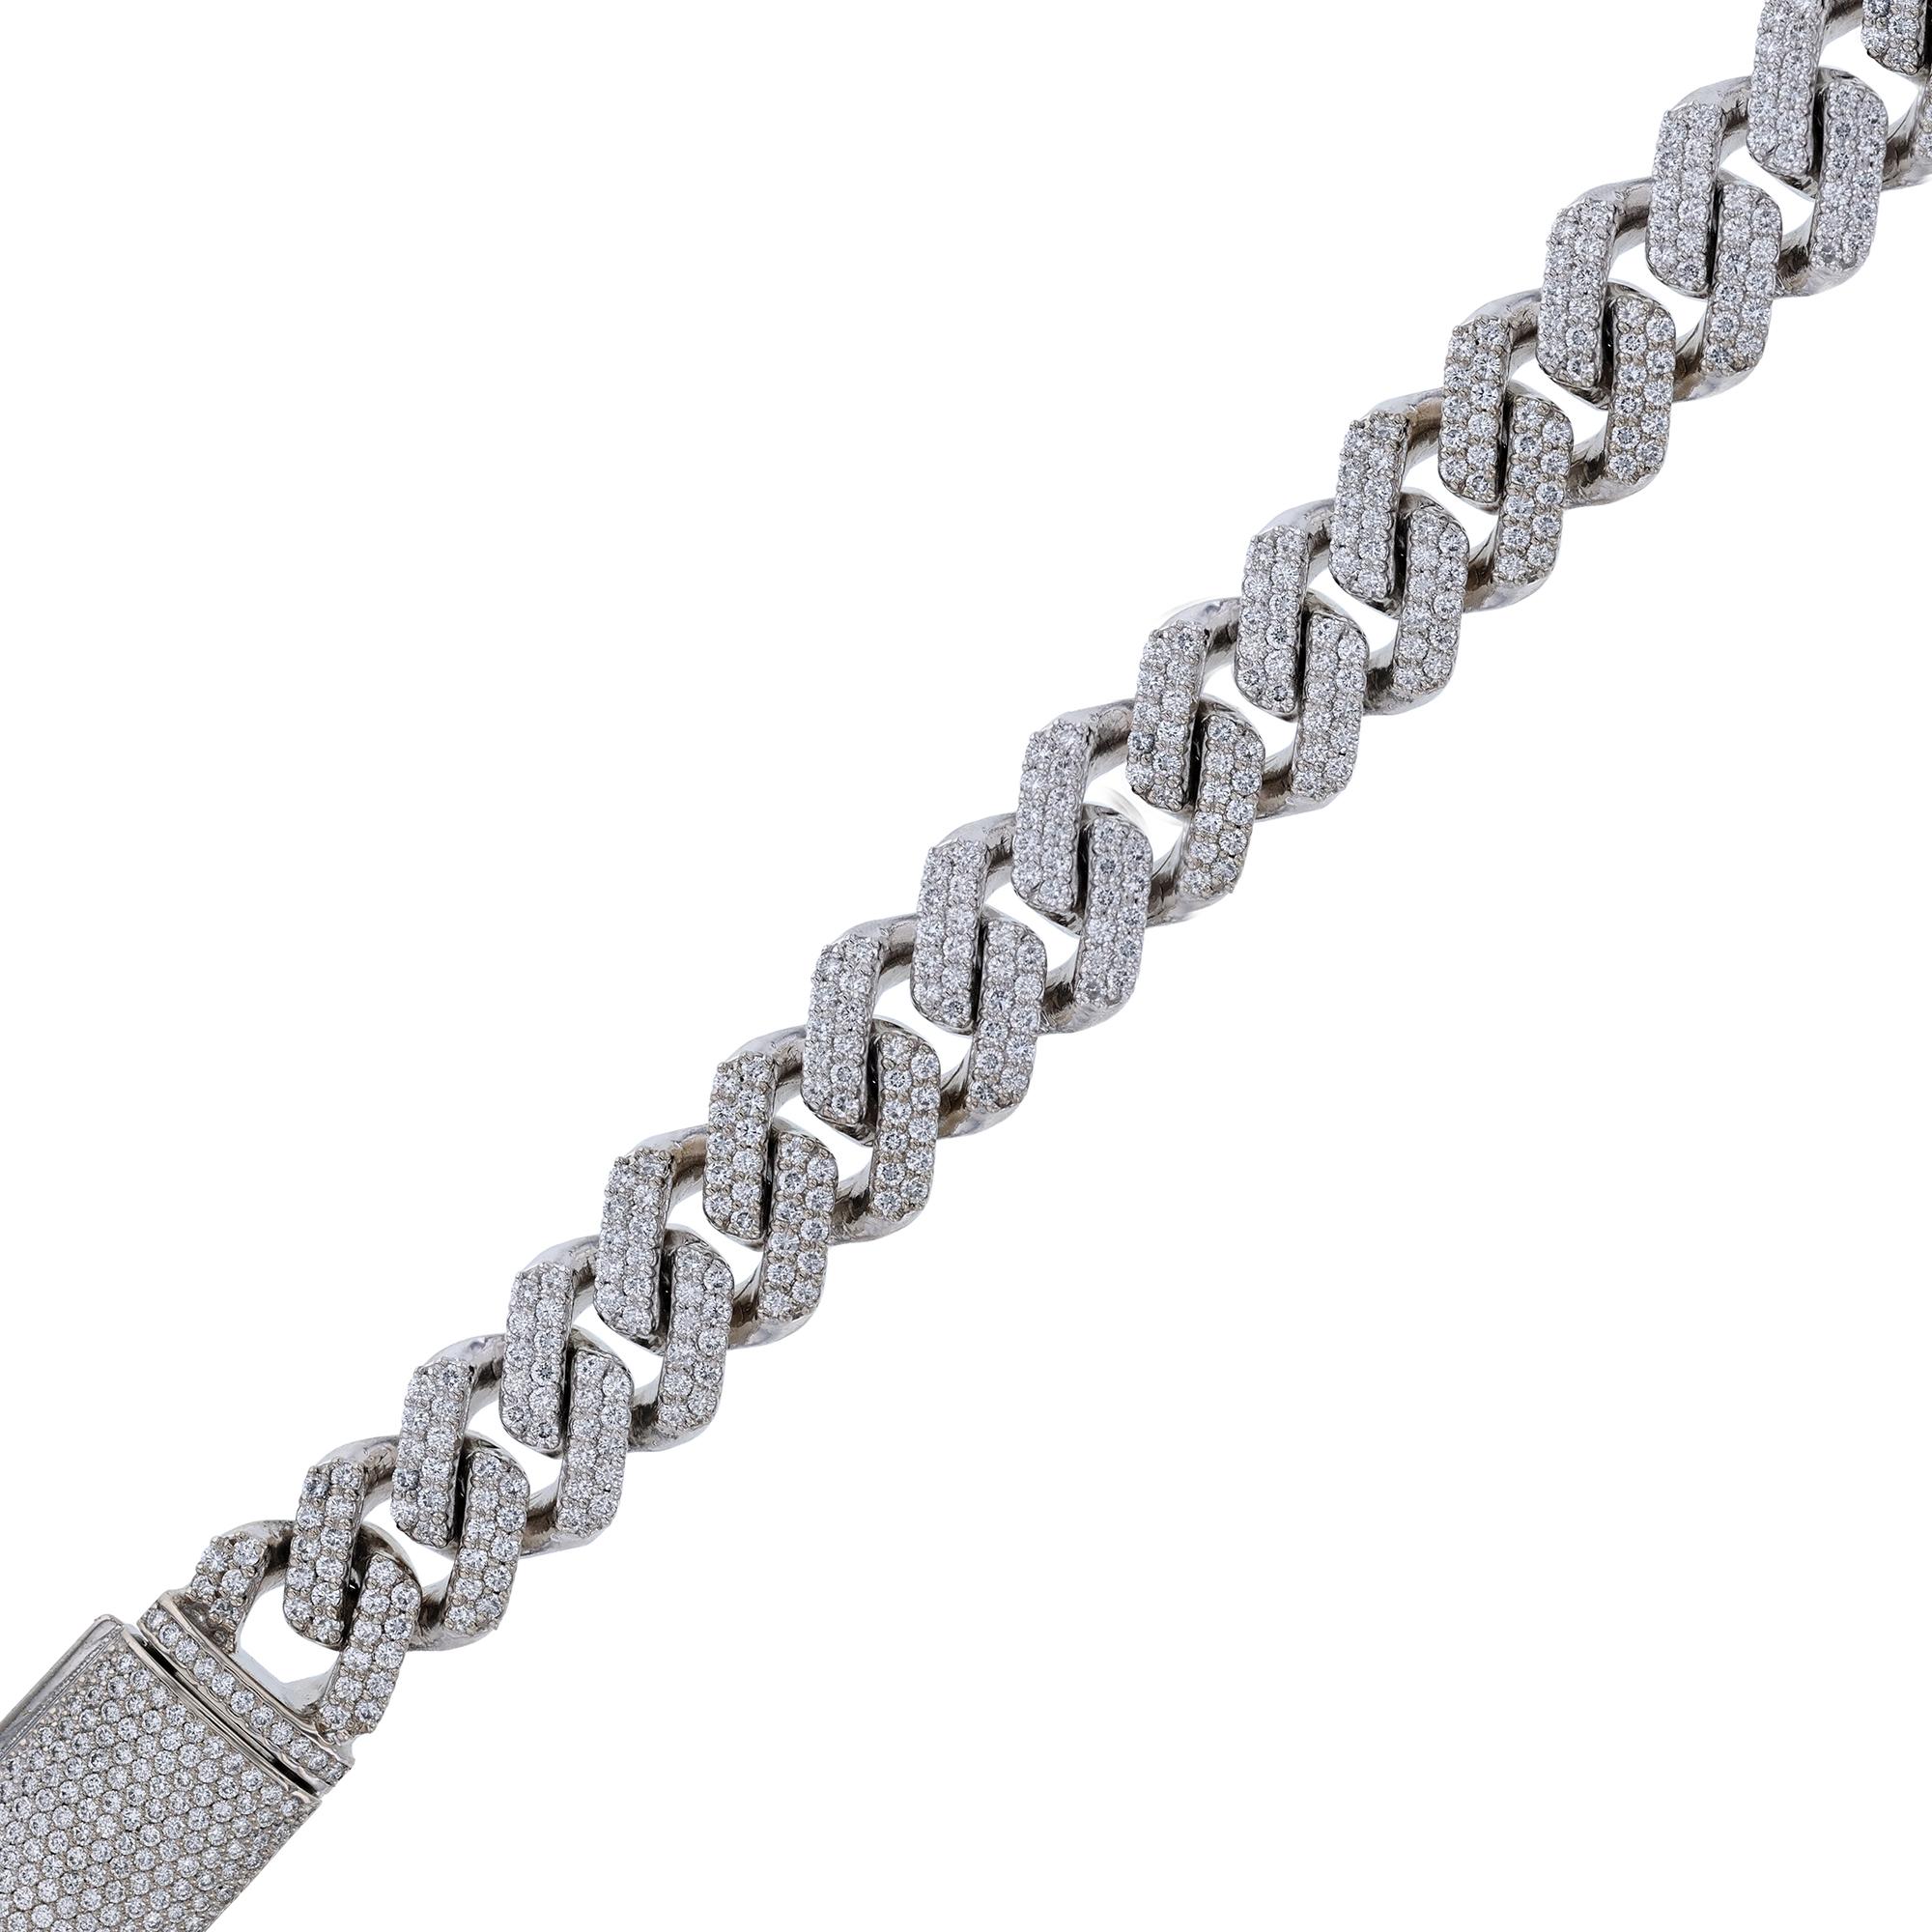 This cuban link bracelet is made in 14K white gold. It features 651 round cut, pave' set diamonds weighing 10.71 carats. This bracelet has a color grade H and clarity grade of SI2. With an outbox clasp.